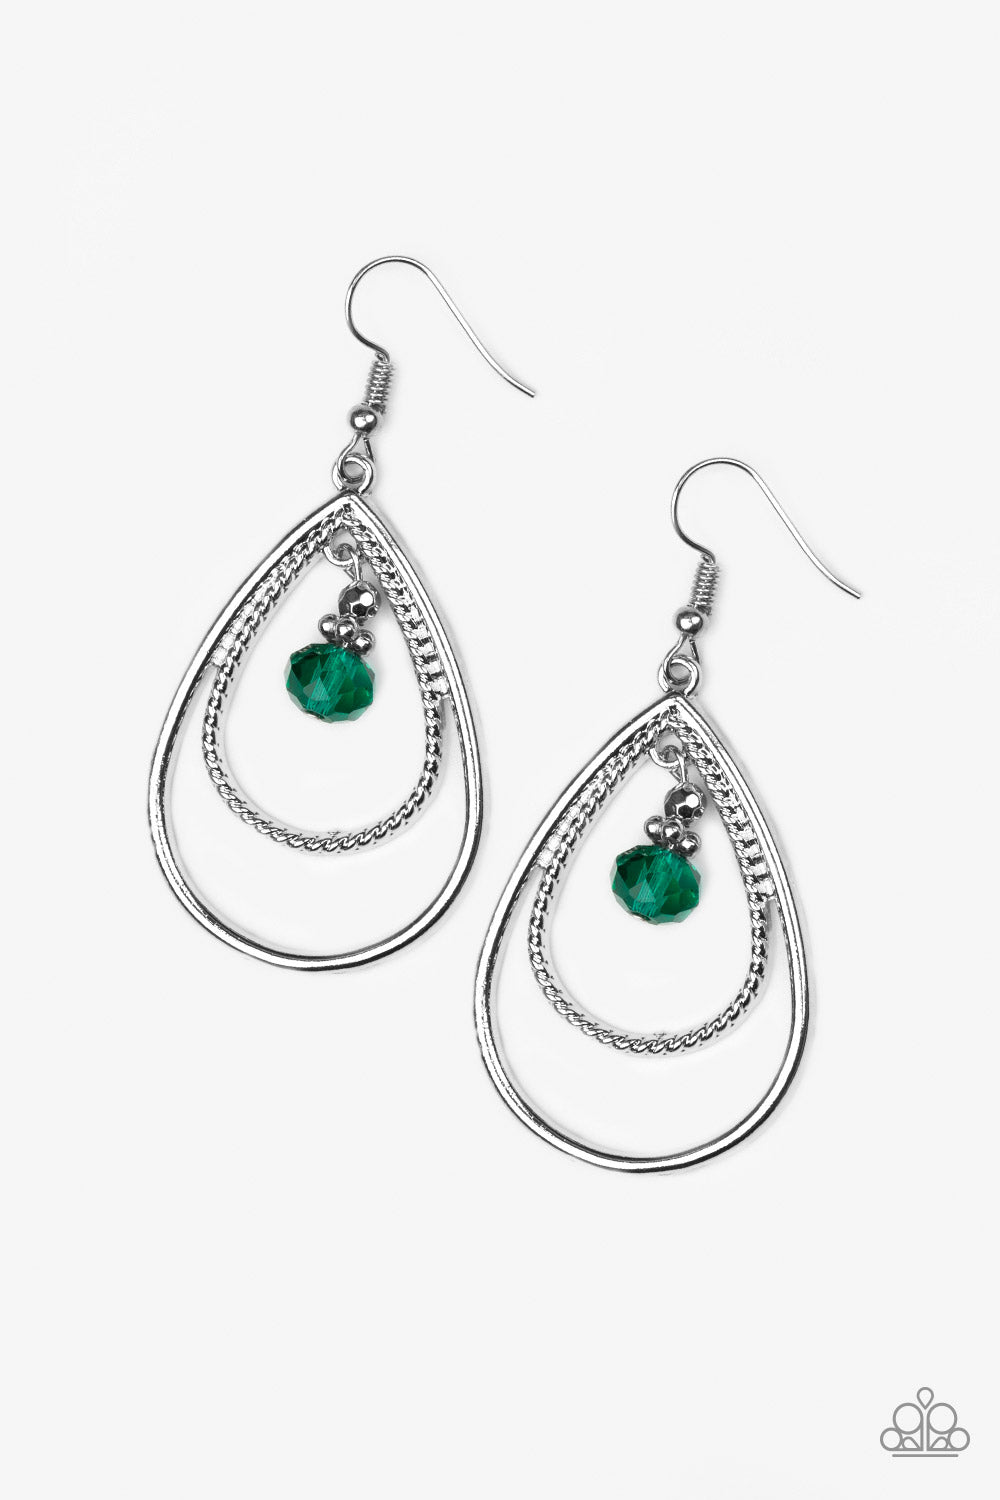 REIGN On My Parade - green - Paparazzi earrings